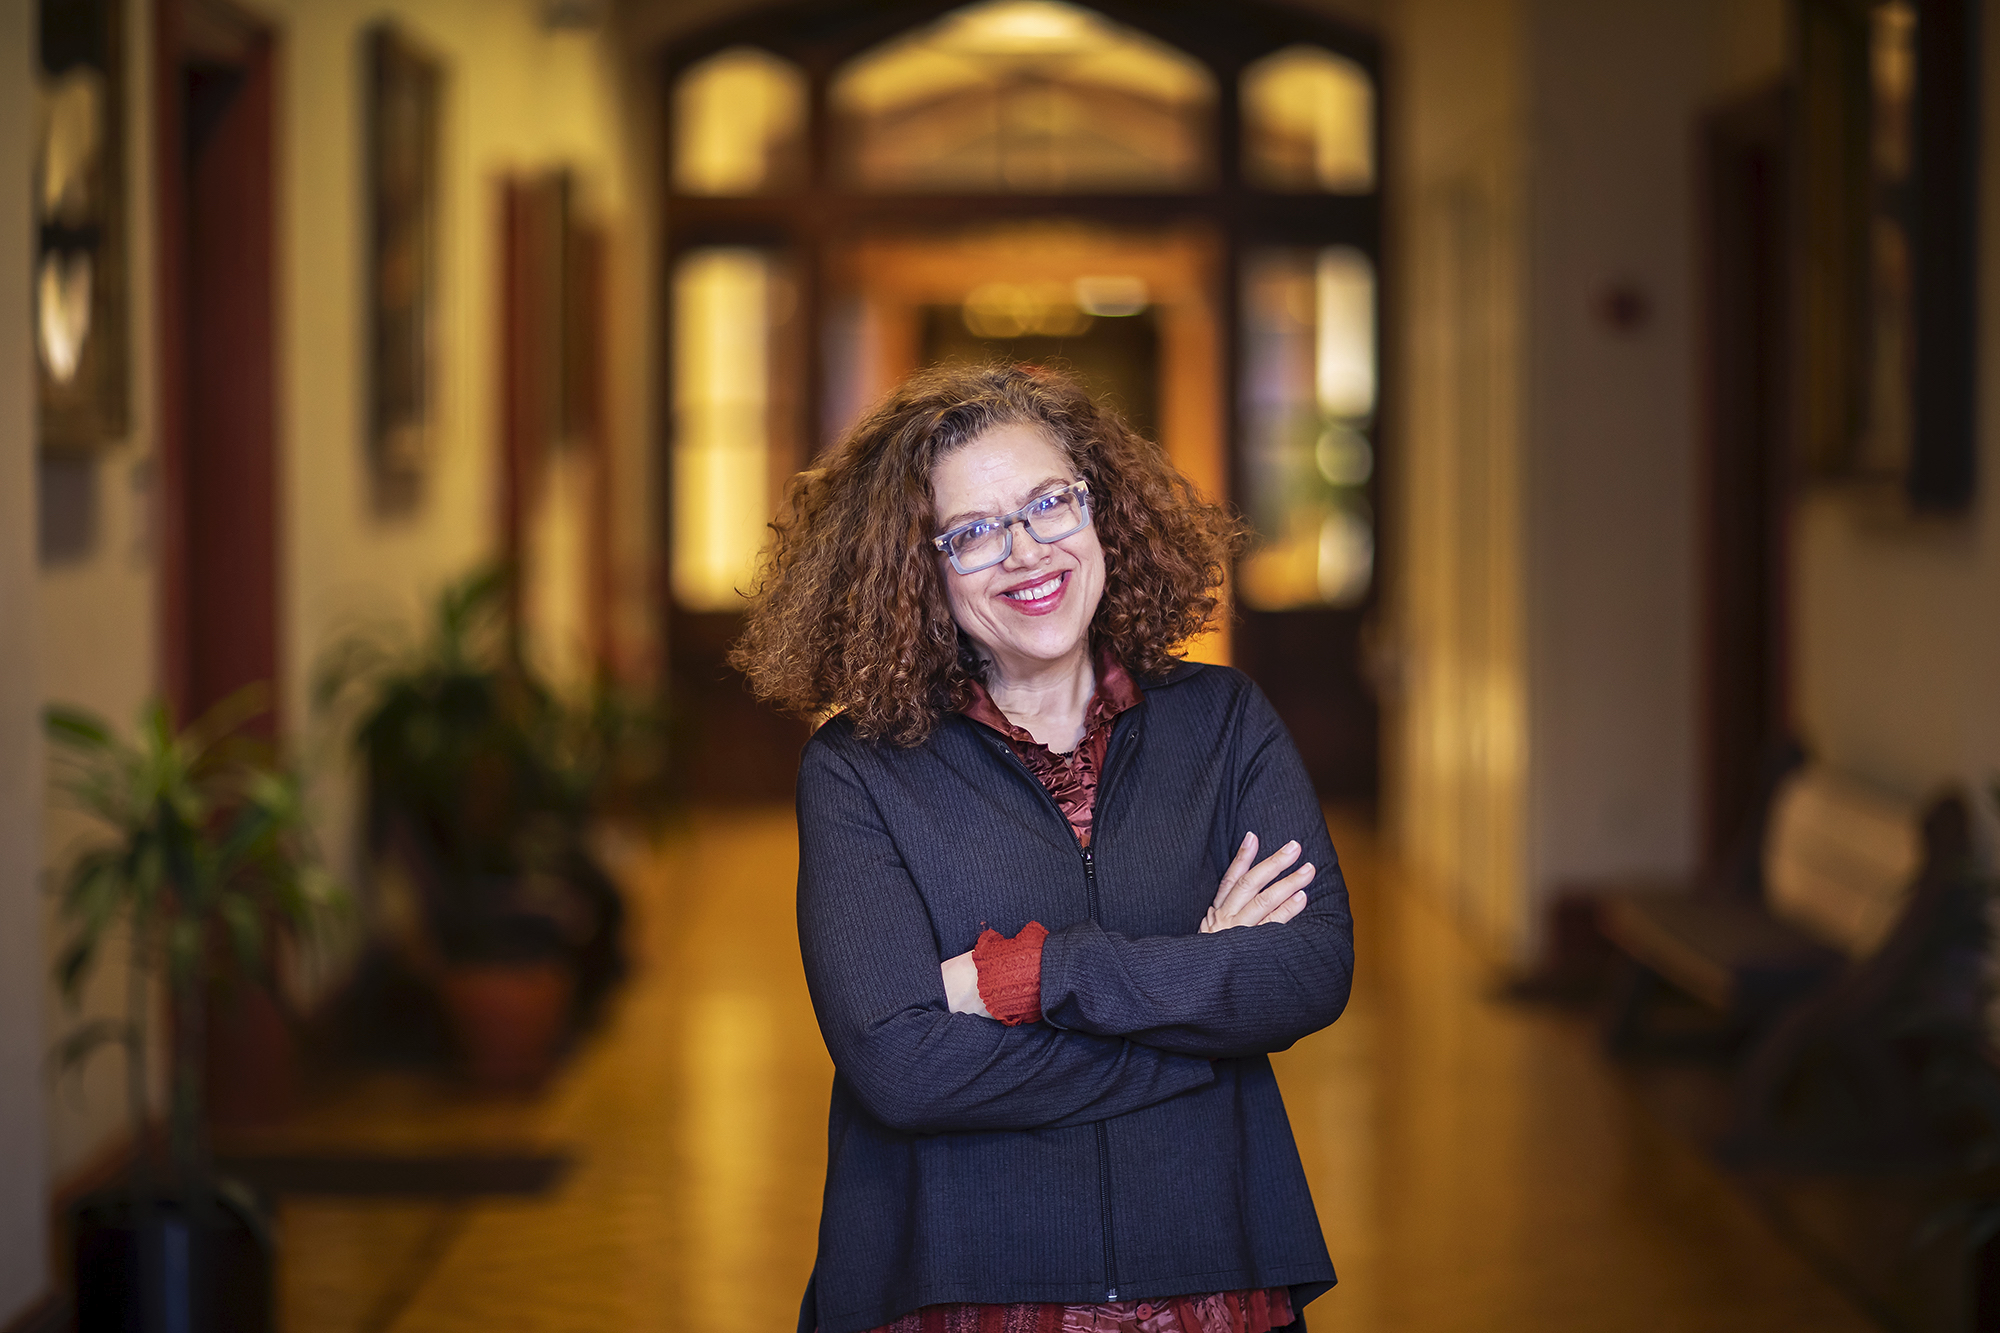 Woman with curly hair and glasses crosses her arms and smiles at the camera